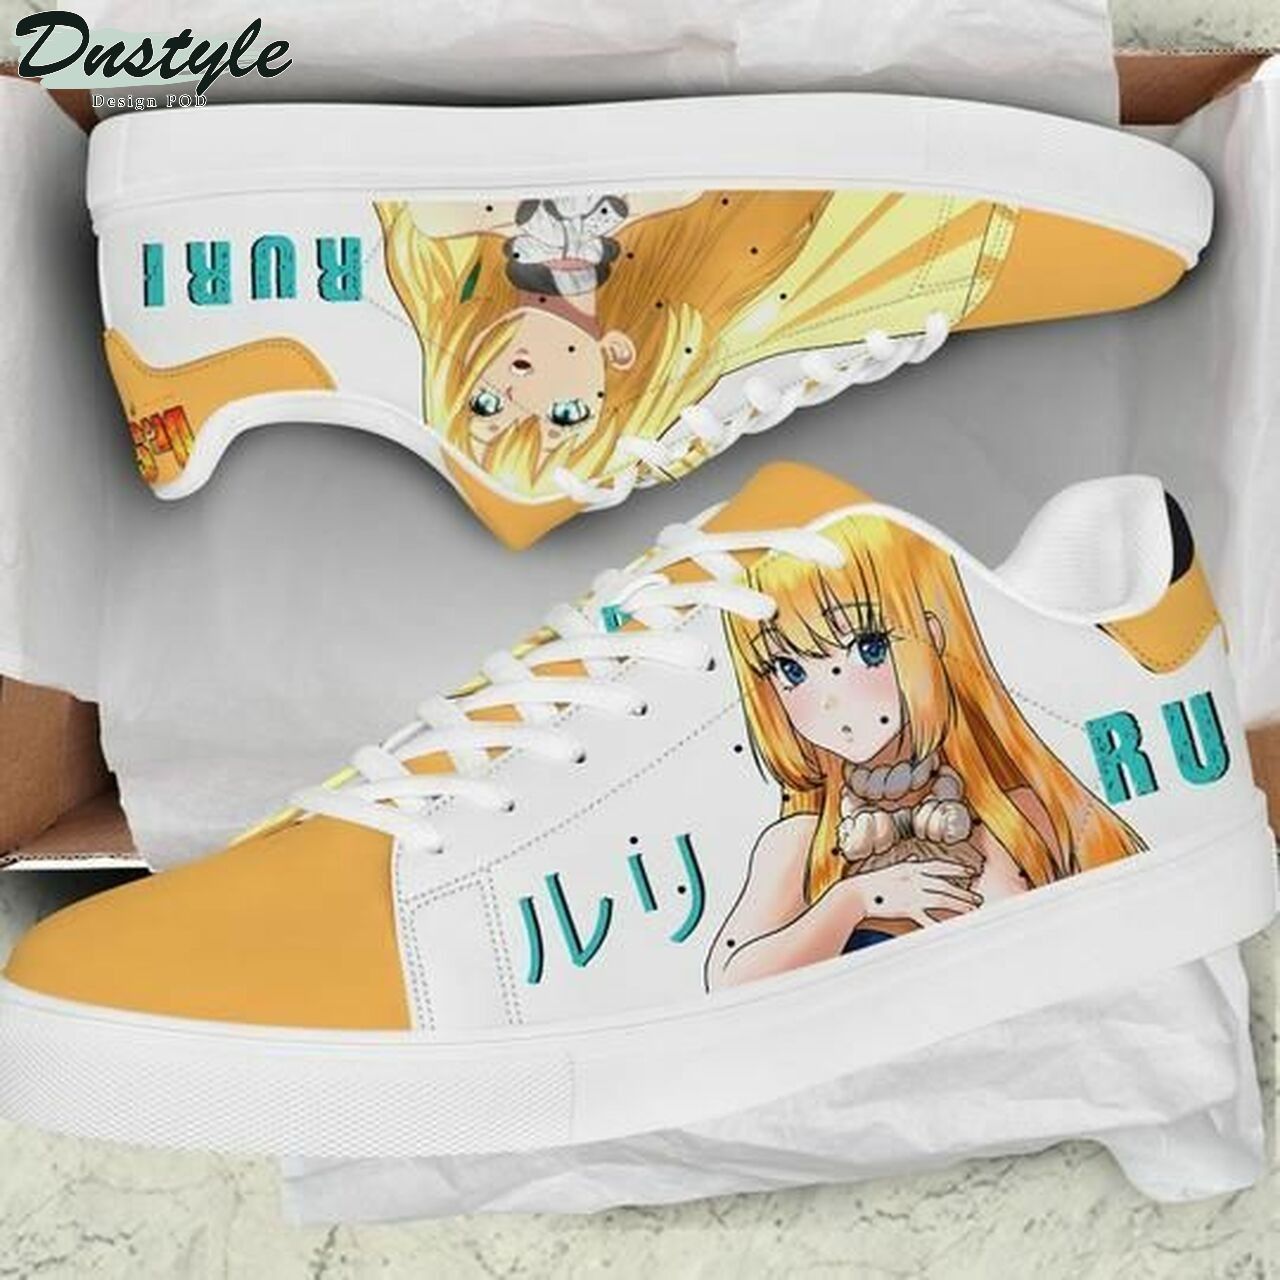 Ruri dr stone stan smith low top skate shoes